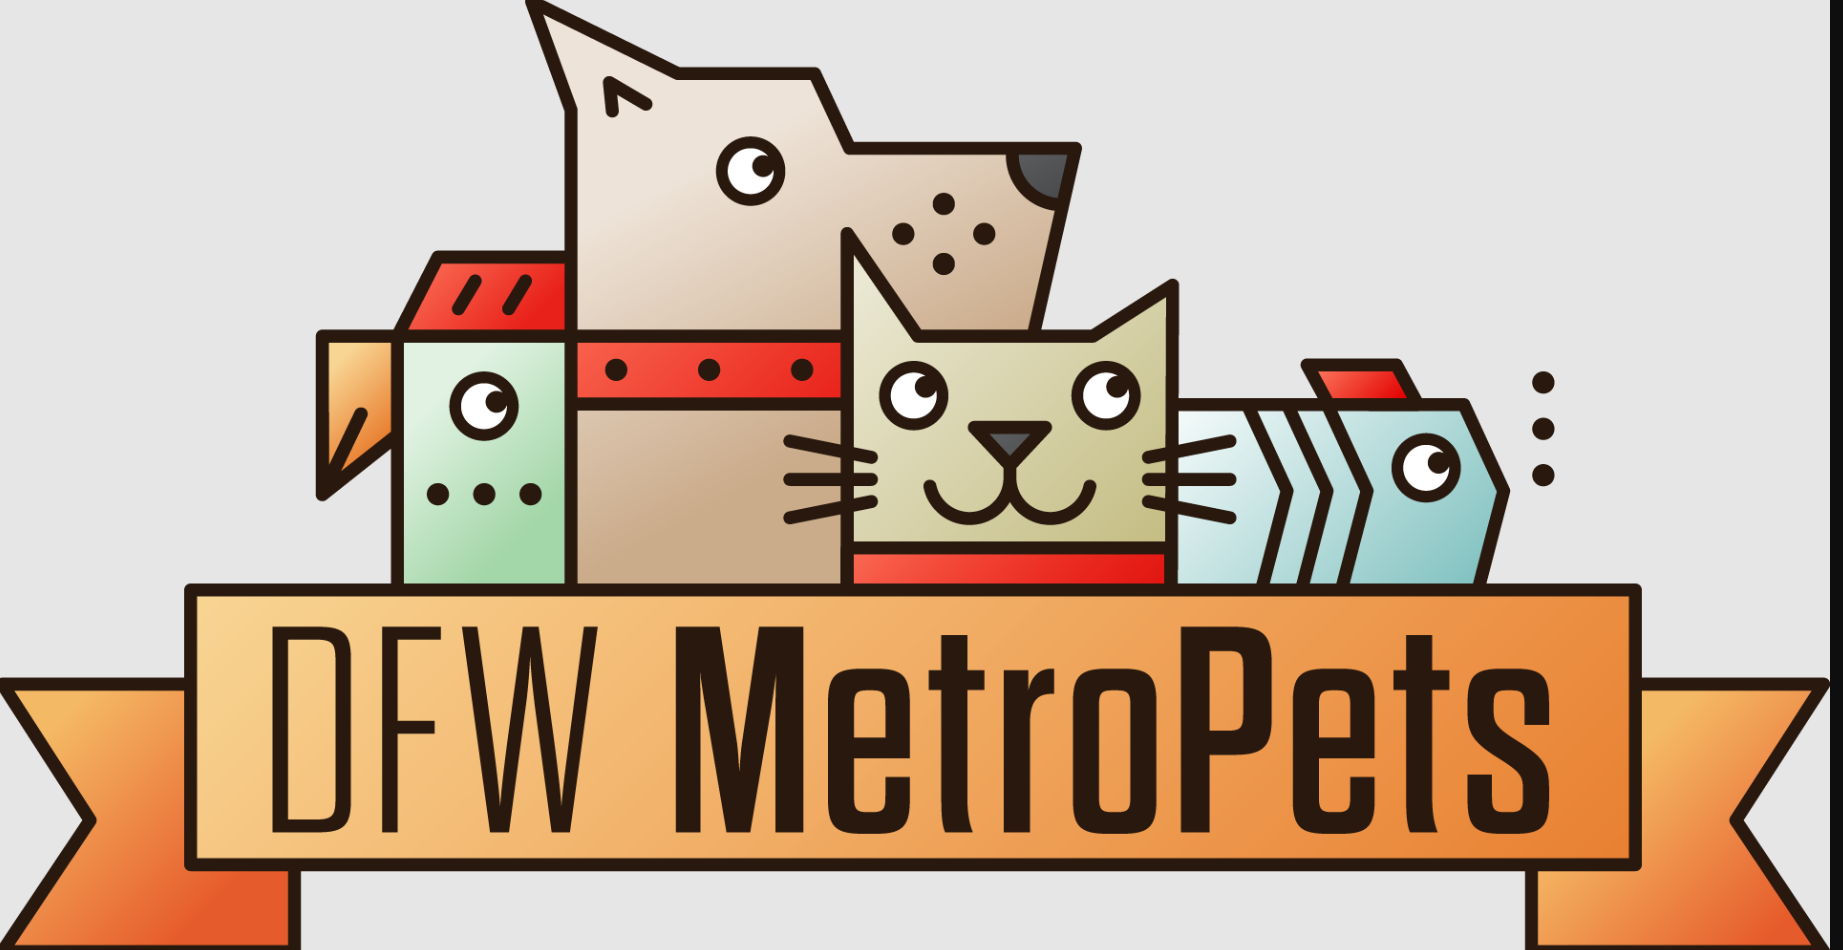 We are in DFW METROPETS Spring Must Haves List!